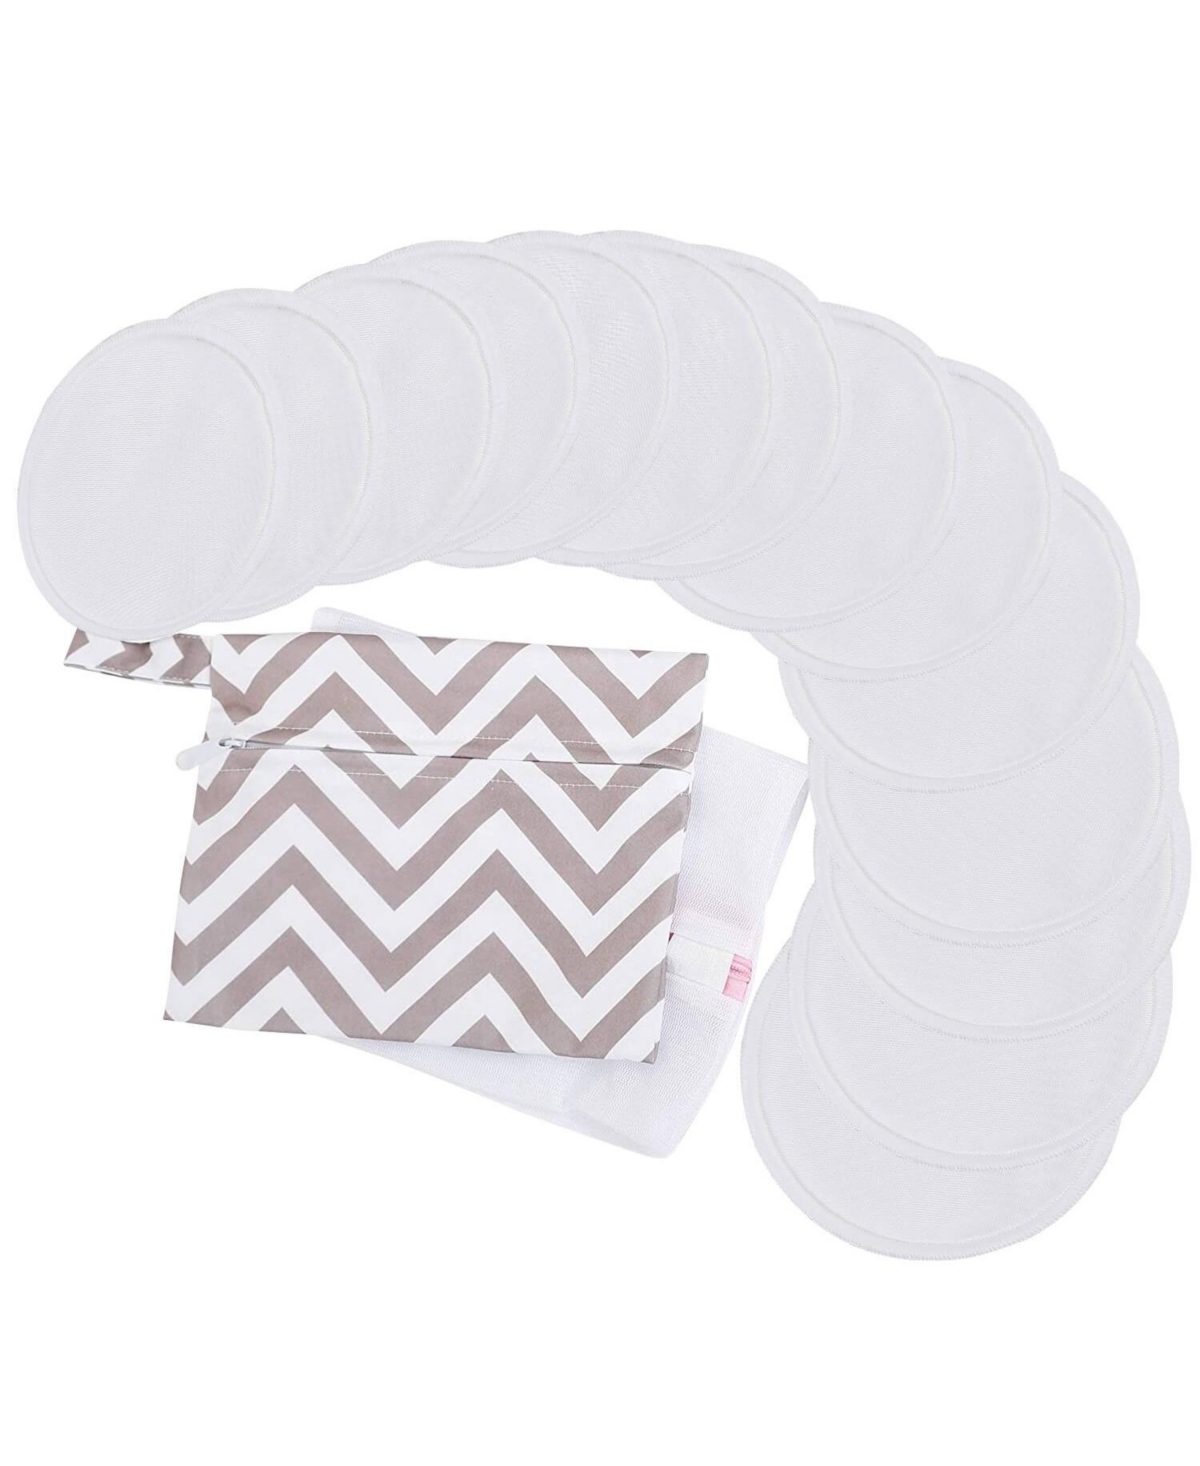 Maternity 14pk Soothe Reusable Nursing Pads for Breastfeeding, 4-Layers Organic Breast Pads, Washable Nipple Pads - Neutrals